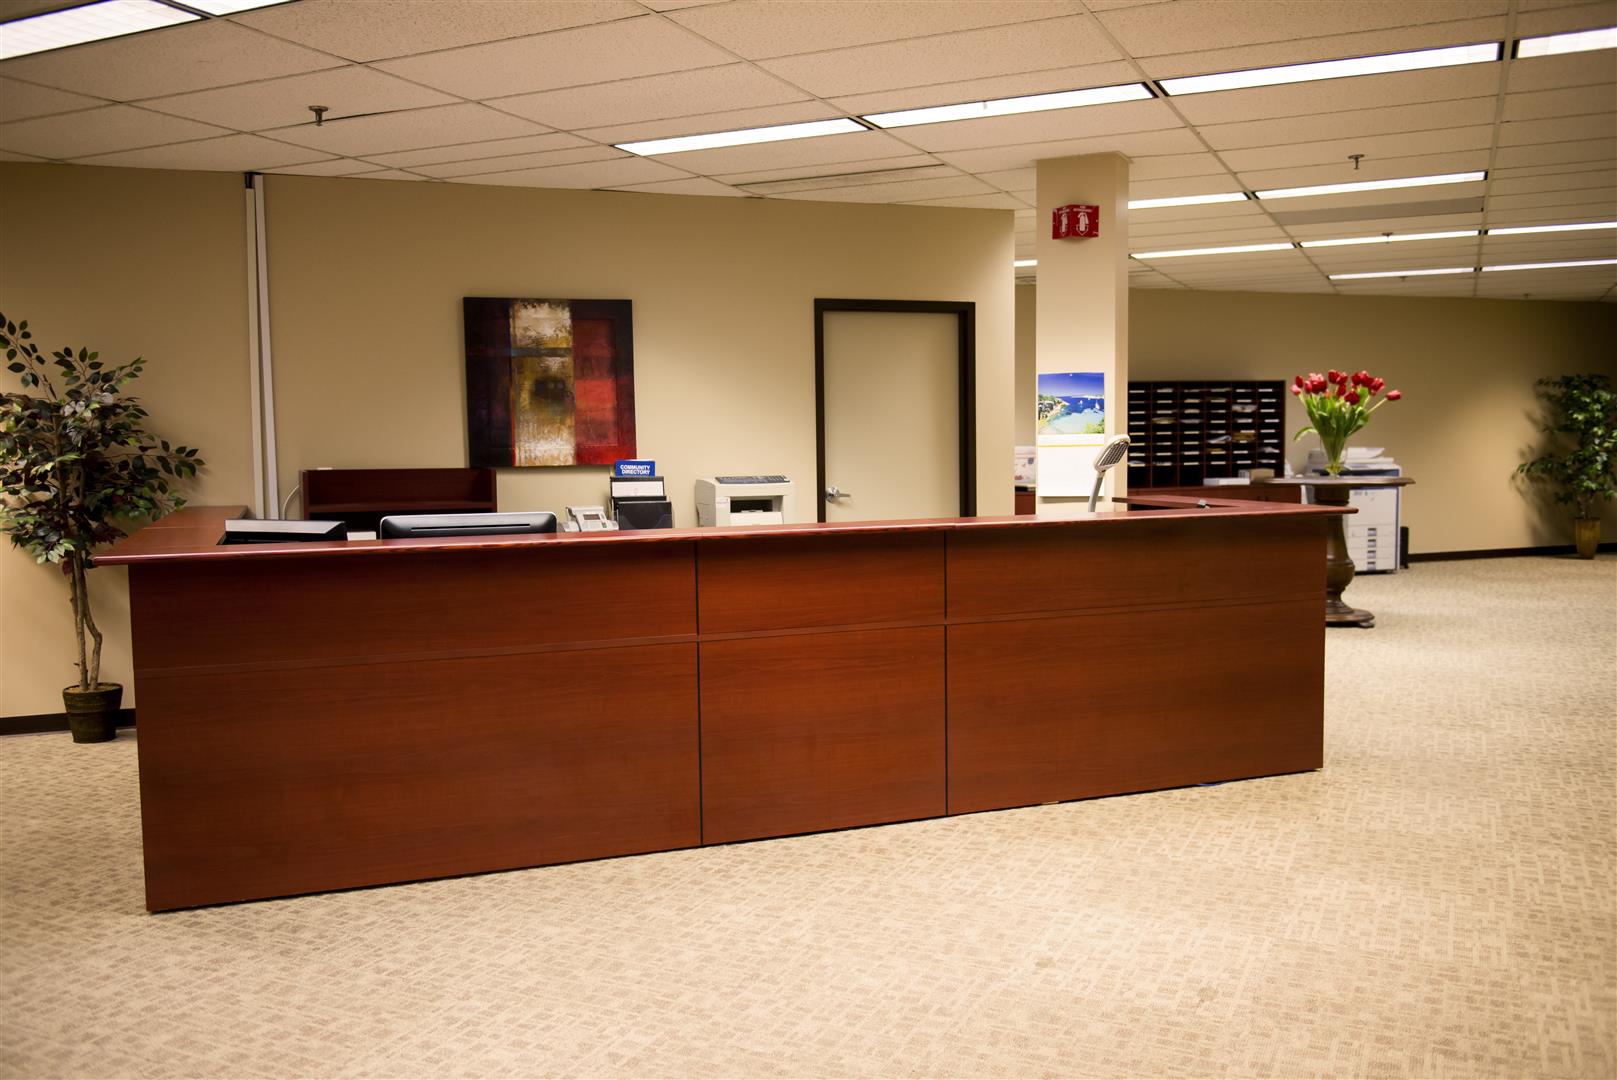 Main desk at the Mansfield location